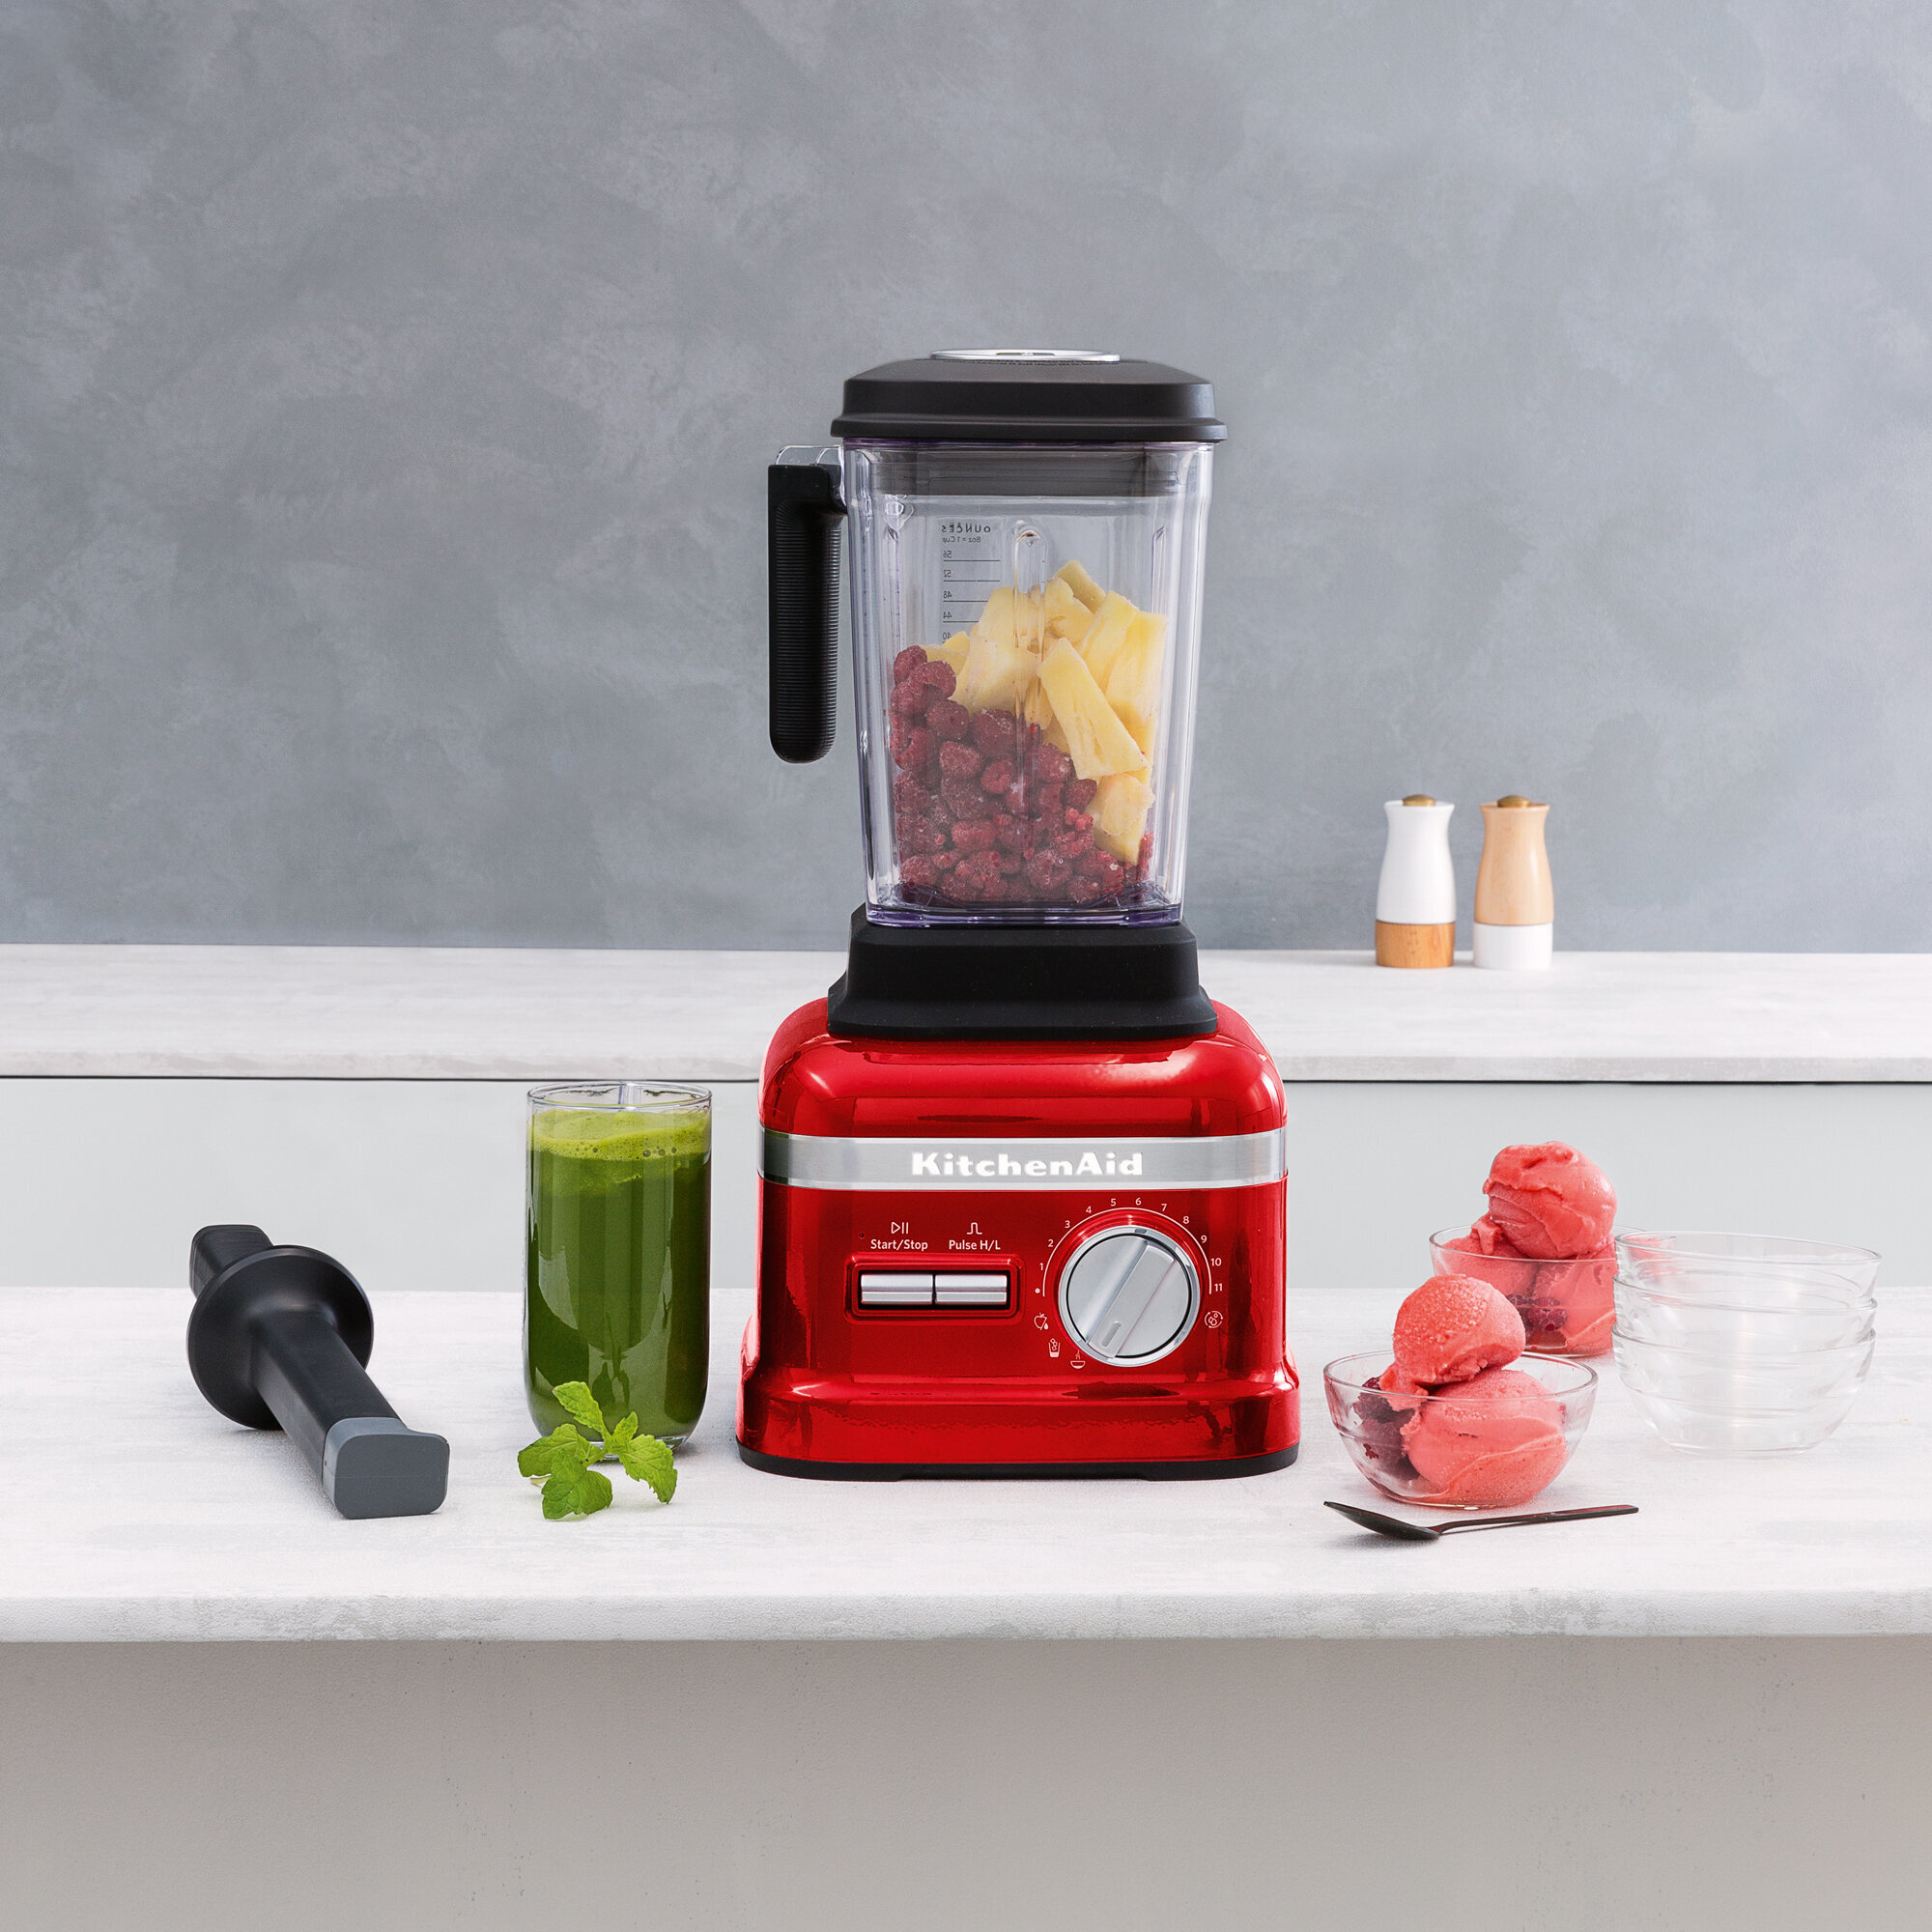 Pro Line® Series Blender with Thermal Control Jar Candy Apple Red